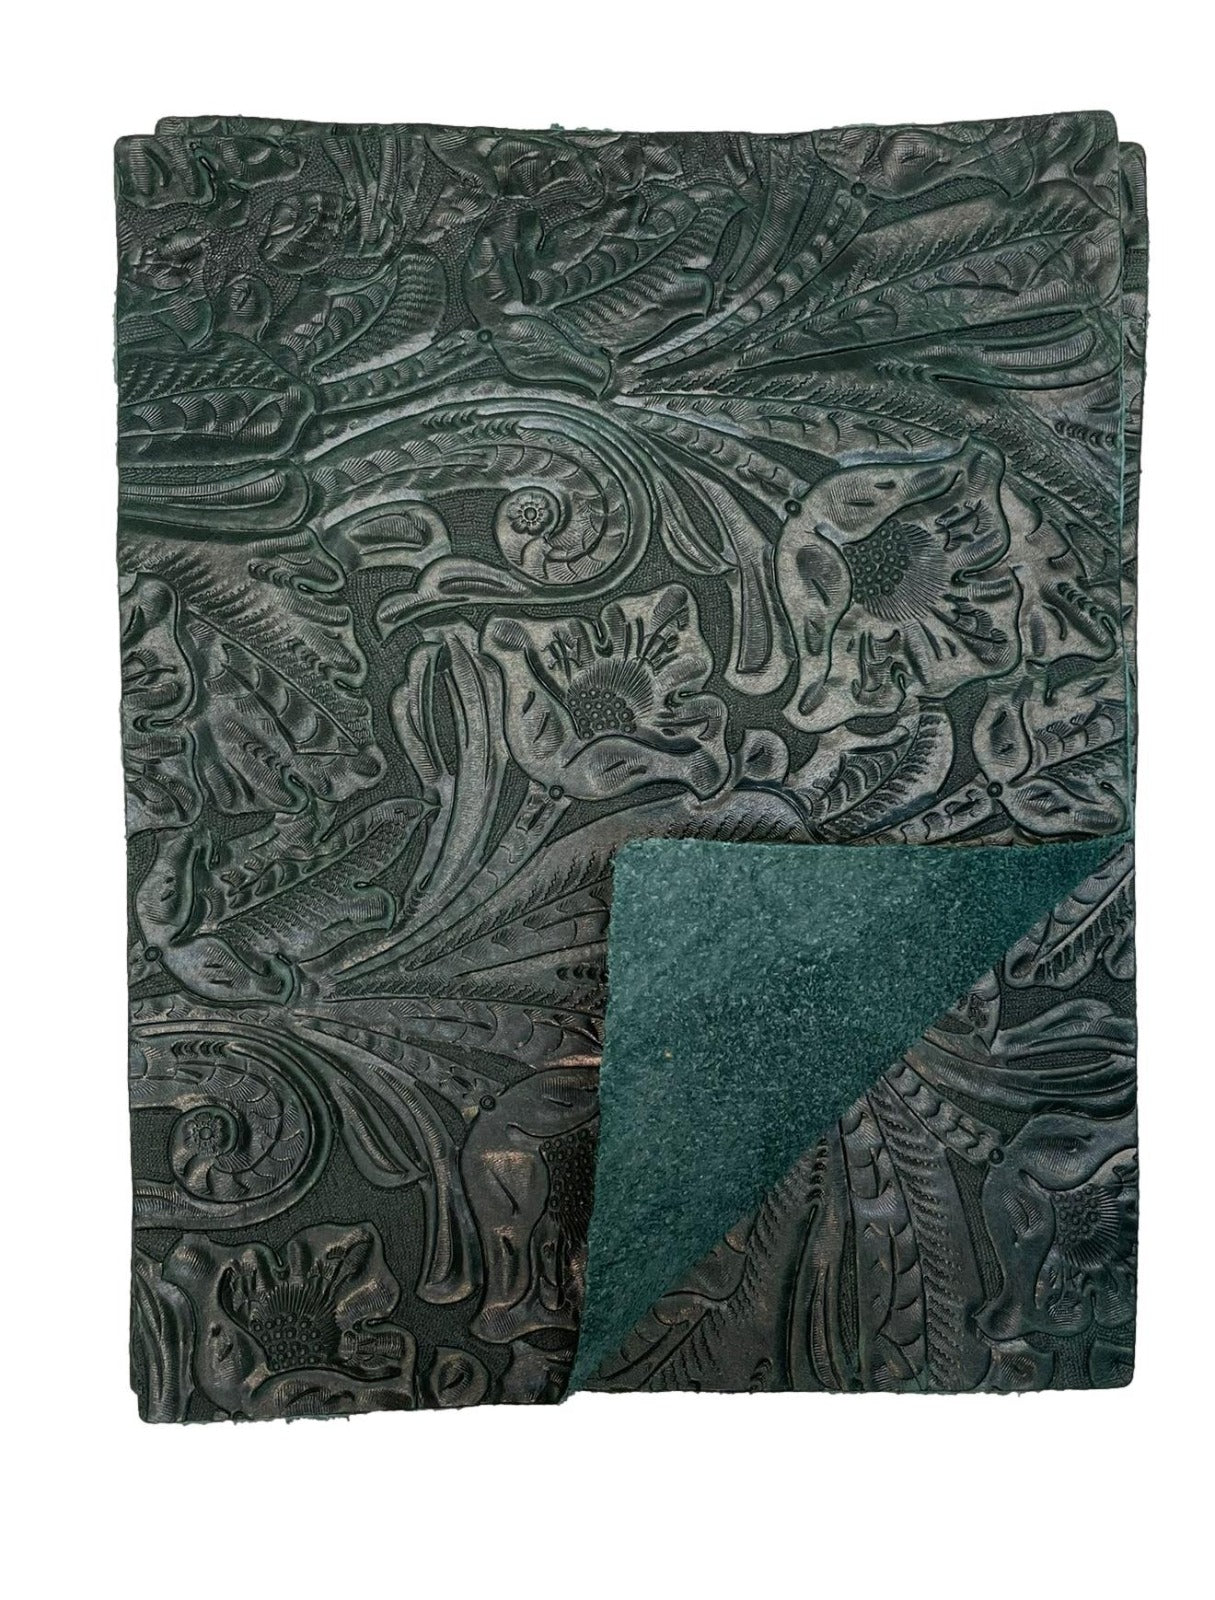 Special Offering - Hunter Green Large Floral Embossed Cowhide Leather: 8.5" x 11" Pre-Cut Pieces